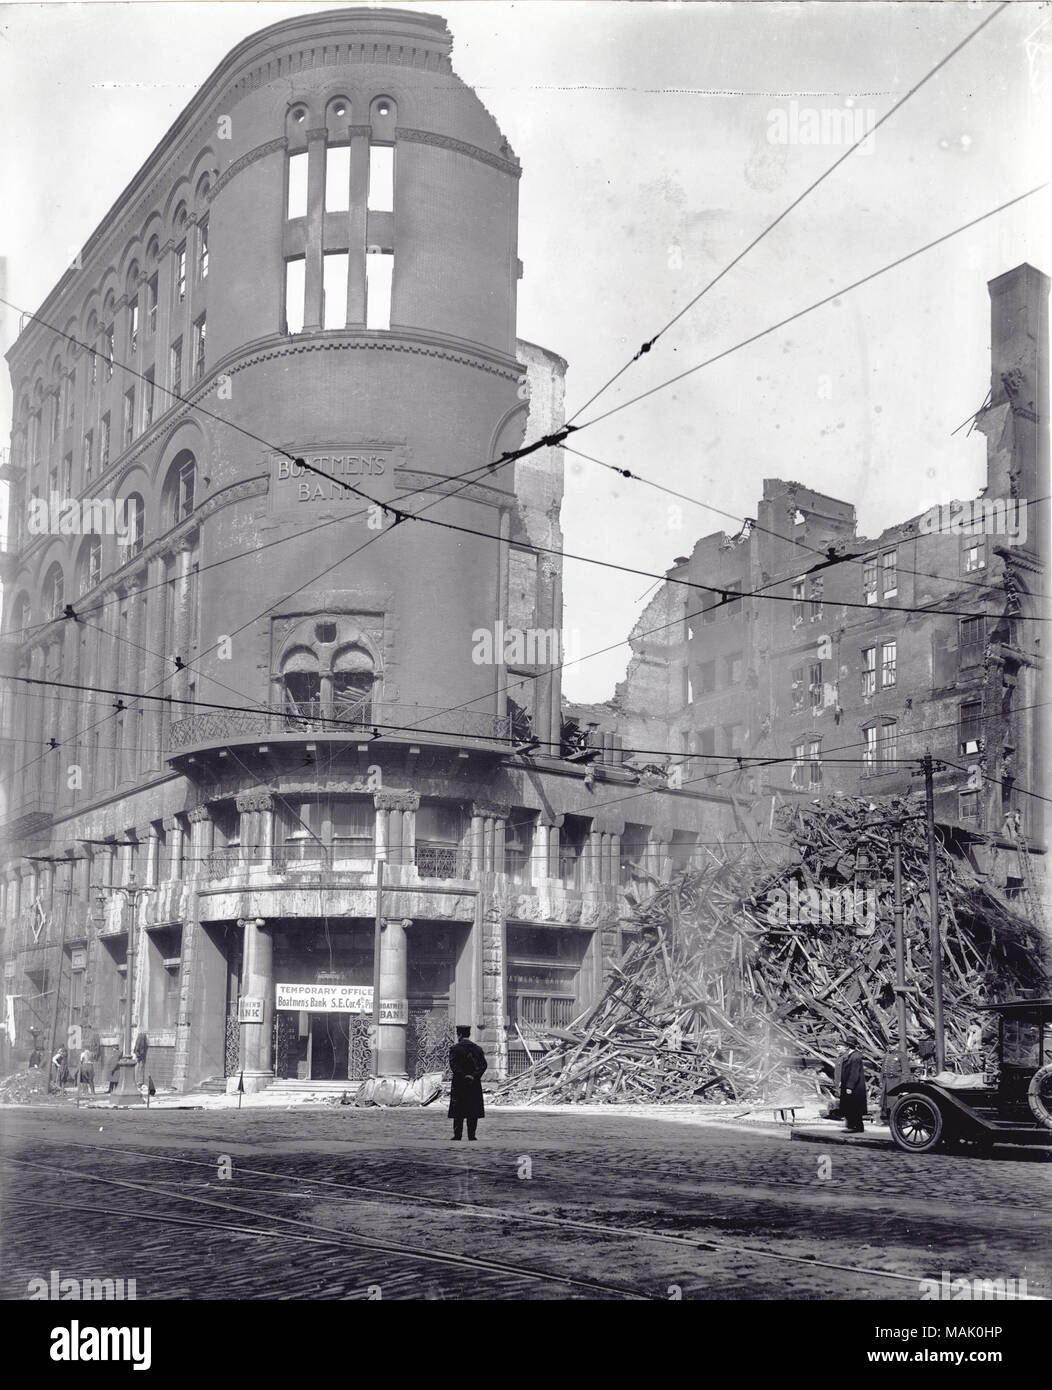 Missouri Athletic Club fire wreckage at the northwest corner of Fourth Street and Washington Avenue. Boatmen's Bank occupied lower floor of the building. The Missouri Athletic Club was founded in 1903 by Charles Henry Genslinger. Genslinger, who has already founded similar such clubs in New Orleans and New York, saw the need in St. Louis for an amateur businessmen ?s athletic club. During the 1904 Olympic Games members of the club competed in boxing, wresting, water polo, swimming, and track. The original club was housed in the Boatman ?s Bank building, seen here. In 1914 a devastating fire de Stock Photo